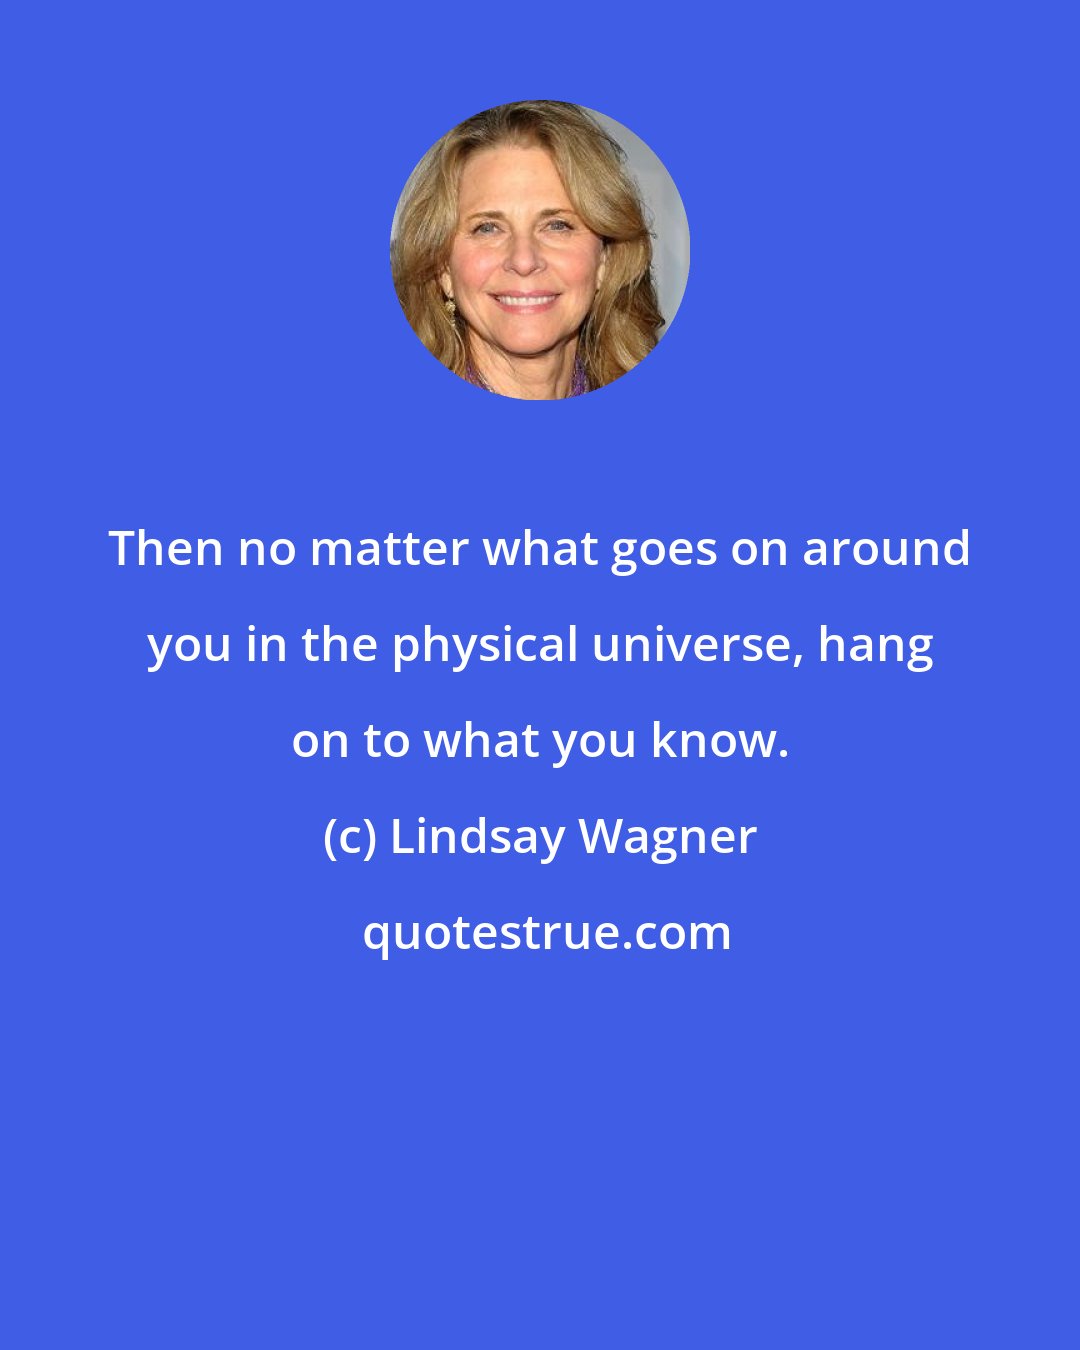 Lindsay Wagner: Then no matter what goes on around you in the physical universe, hang on to what you know.